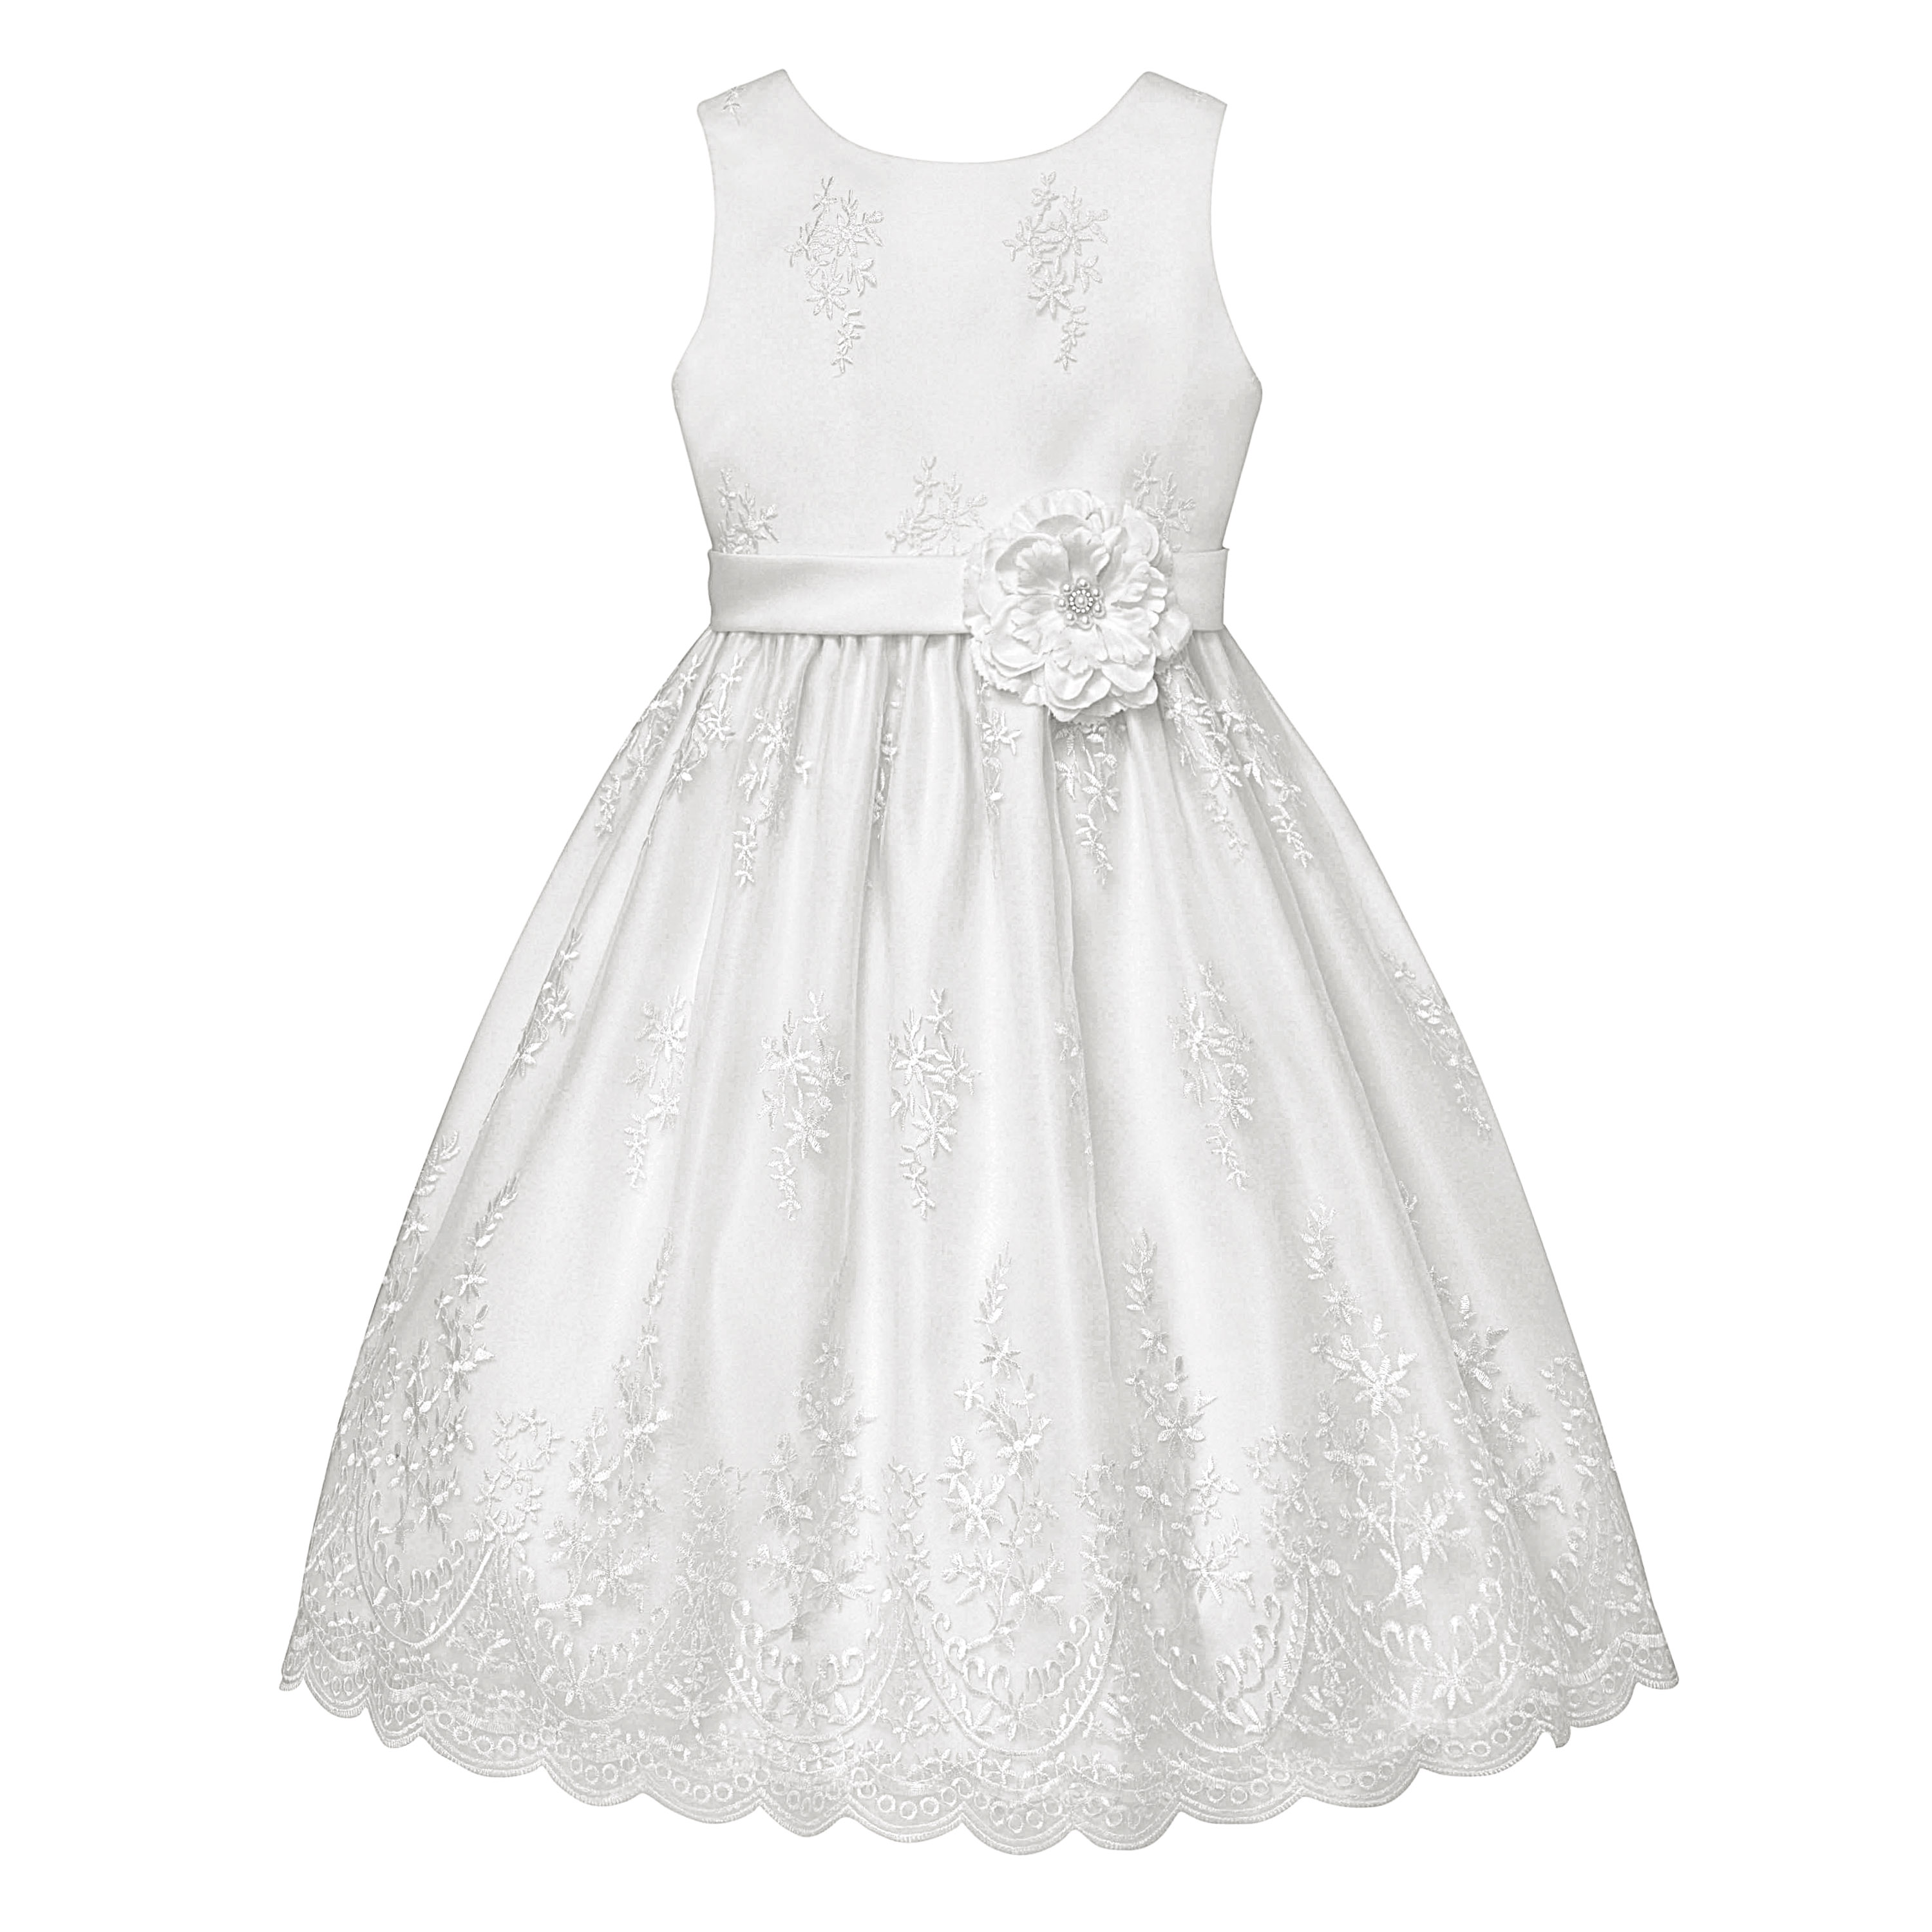 American Princess Girl's Sleeveless White Communion Dress with Border, Embroidery and Rosette